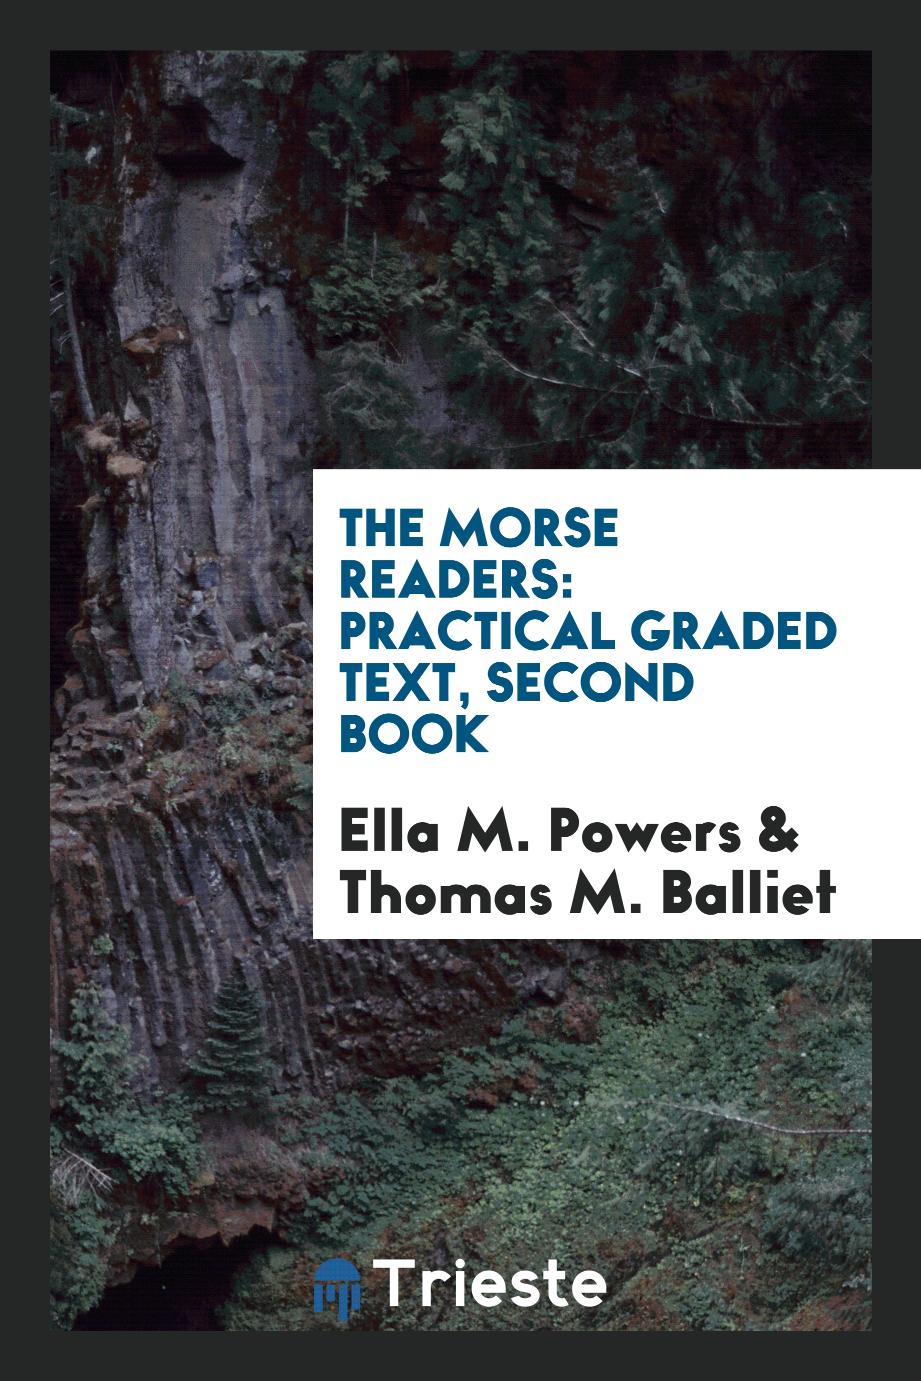 The Morse Readers: Practical Graded Text, Second Book